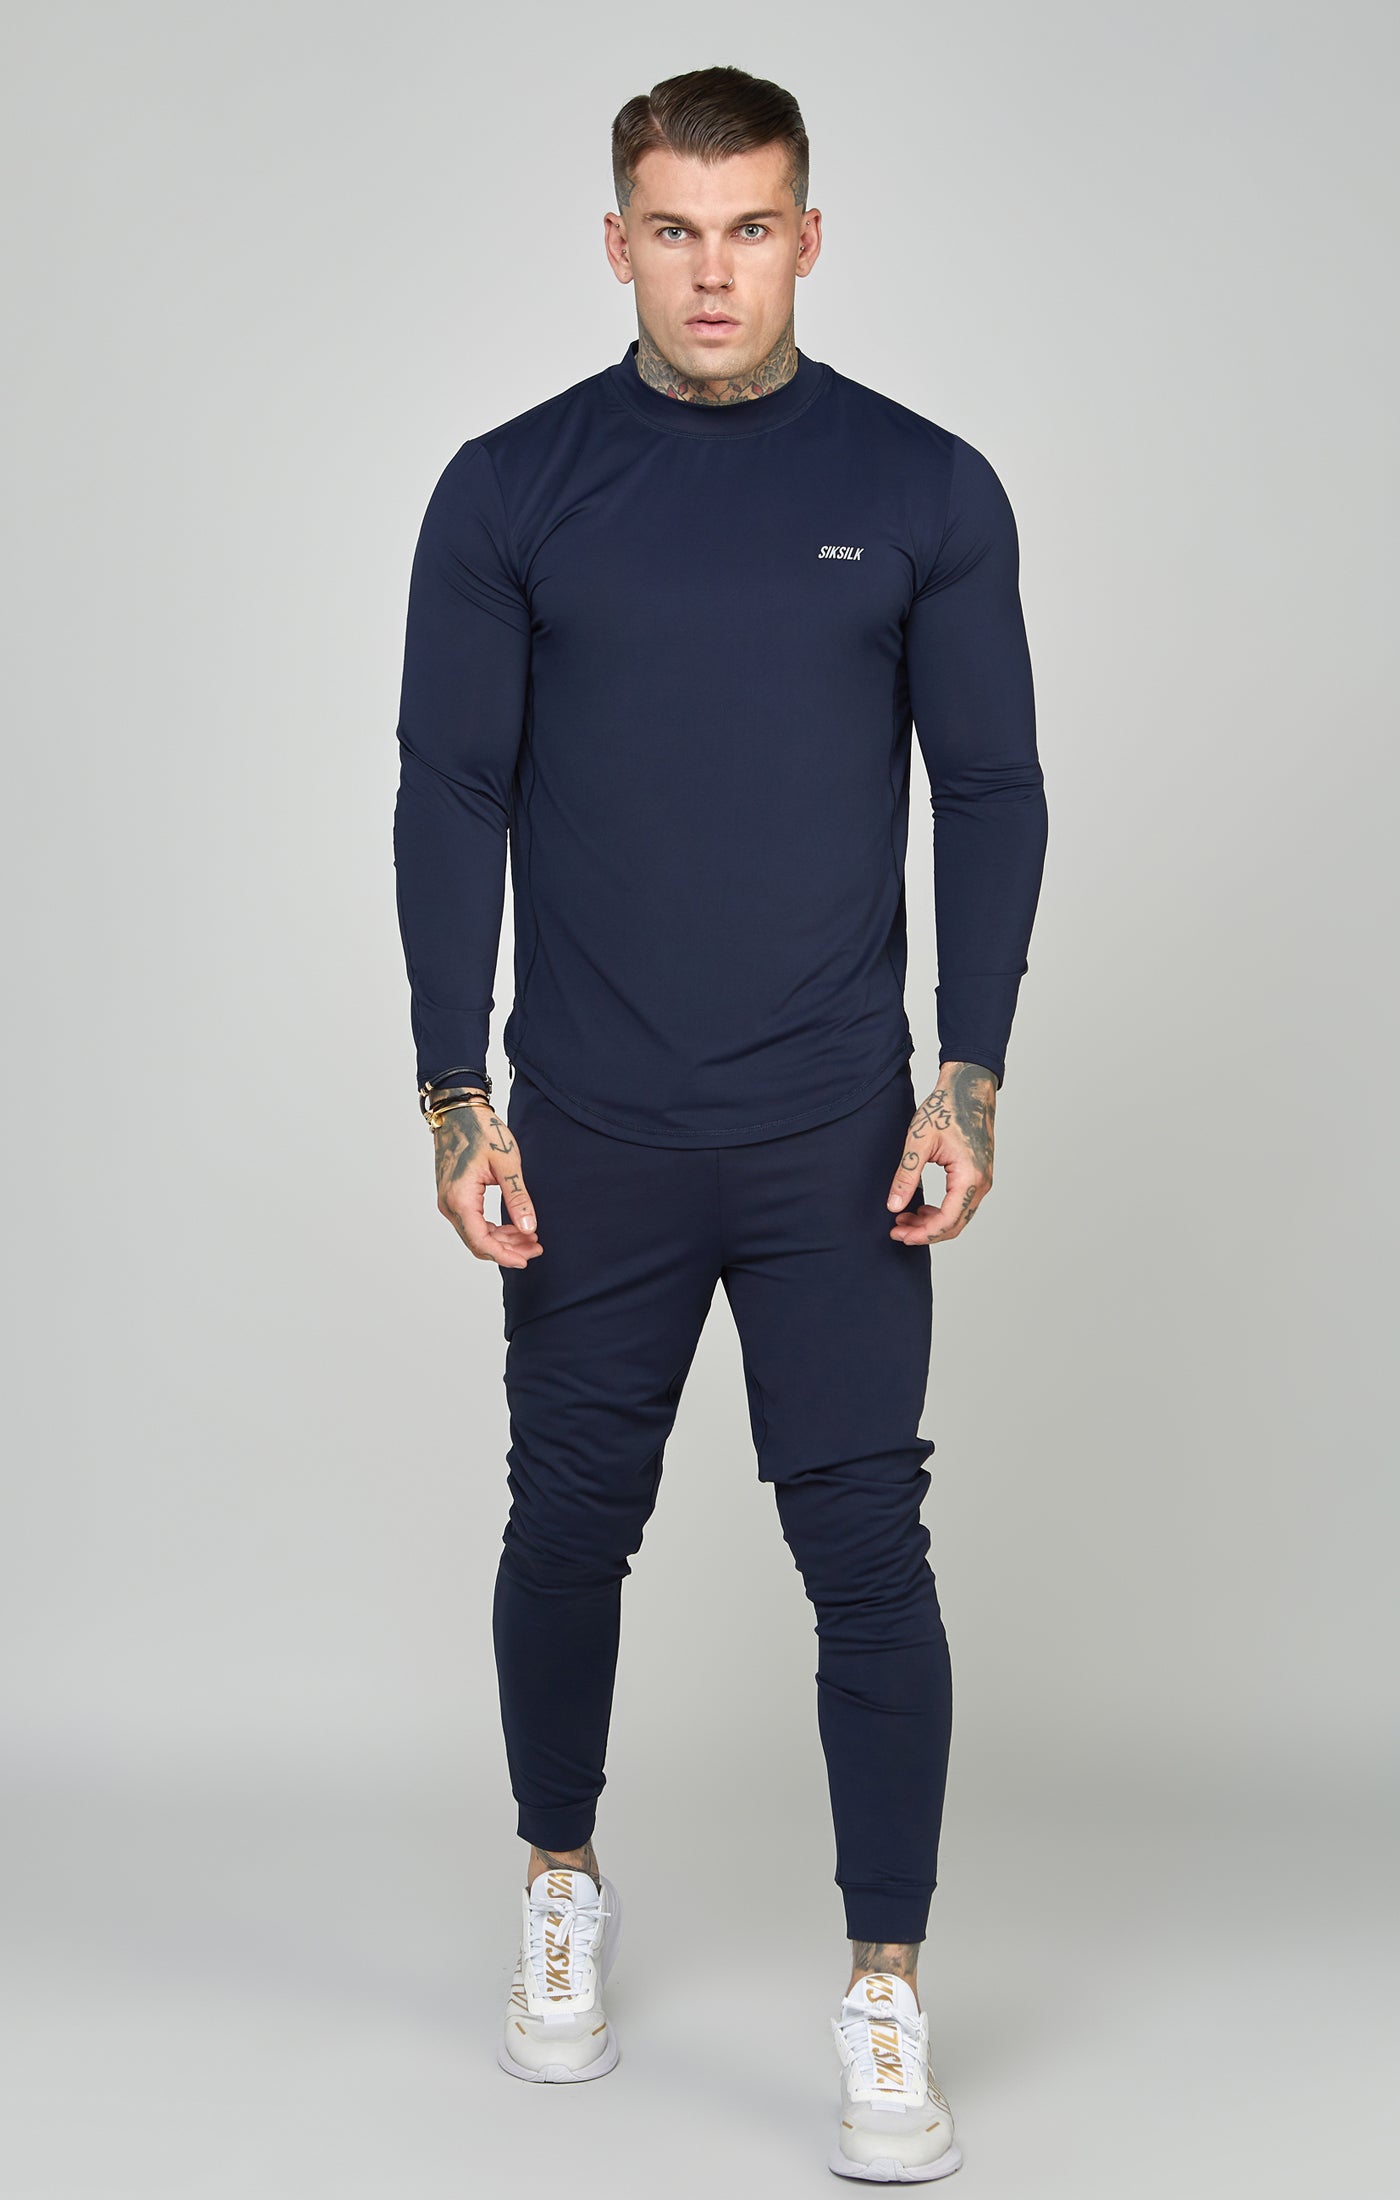 Load image into Gallery viewer, Navy Sports Muscle Fit Long Sleeve Top (1)